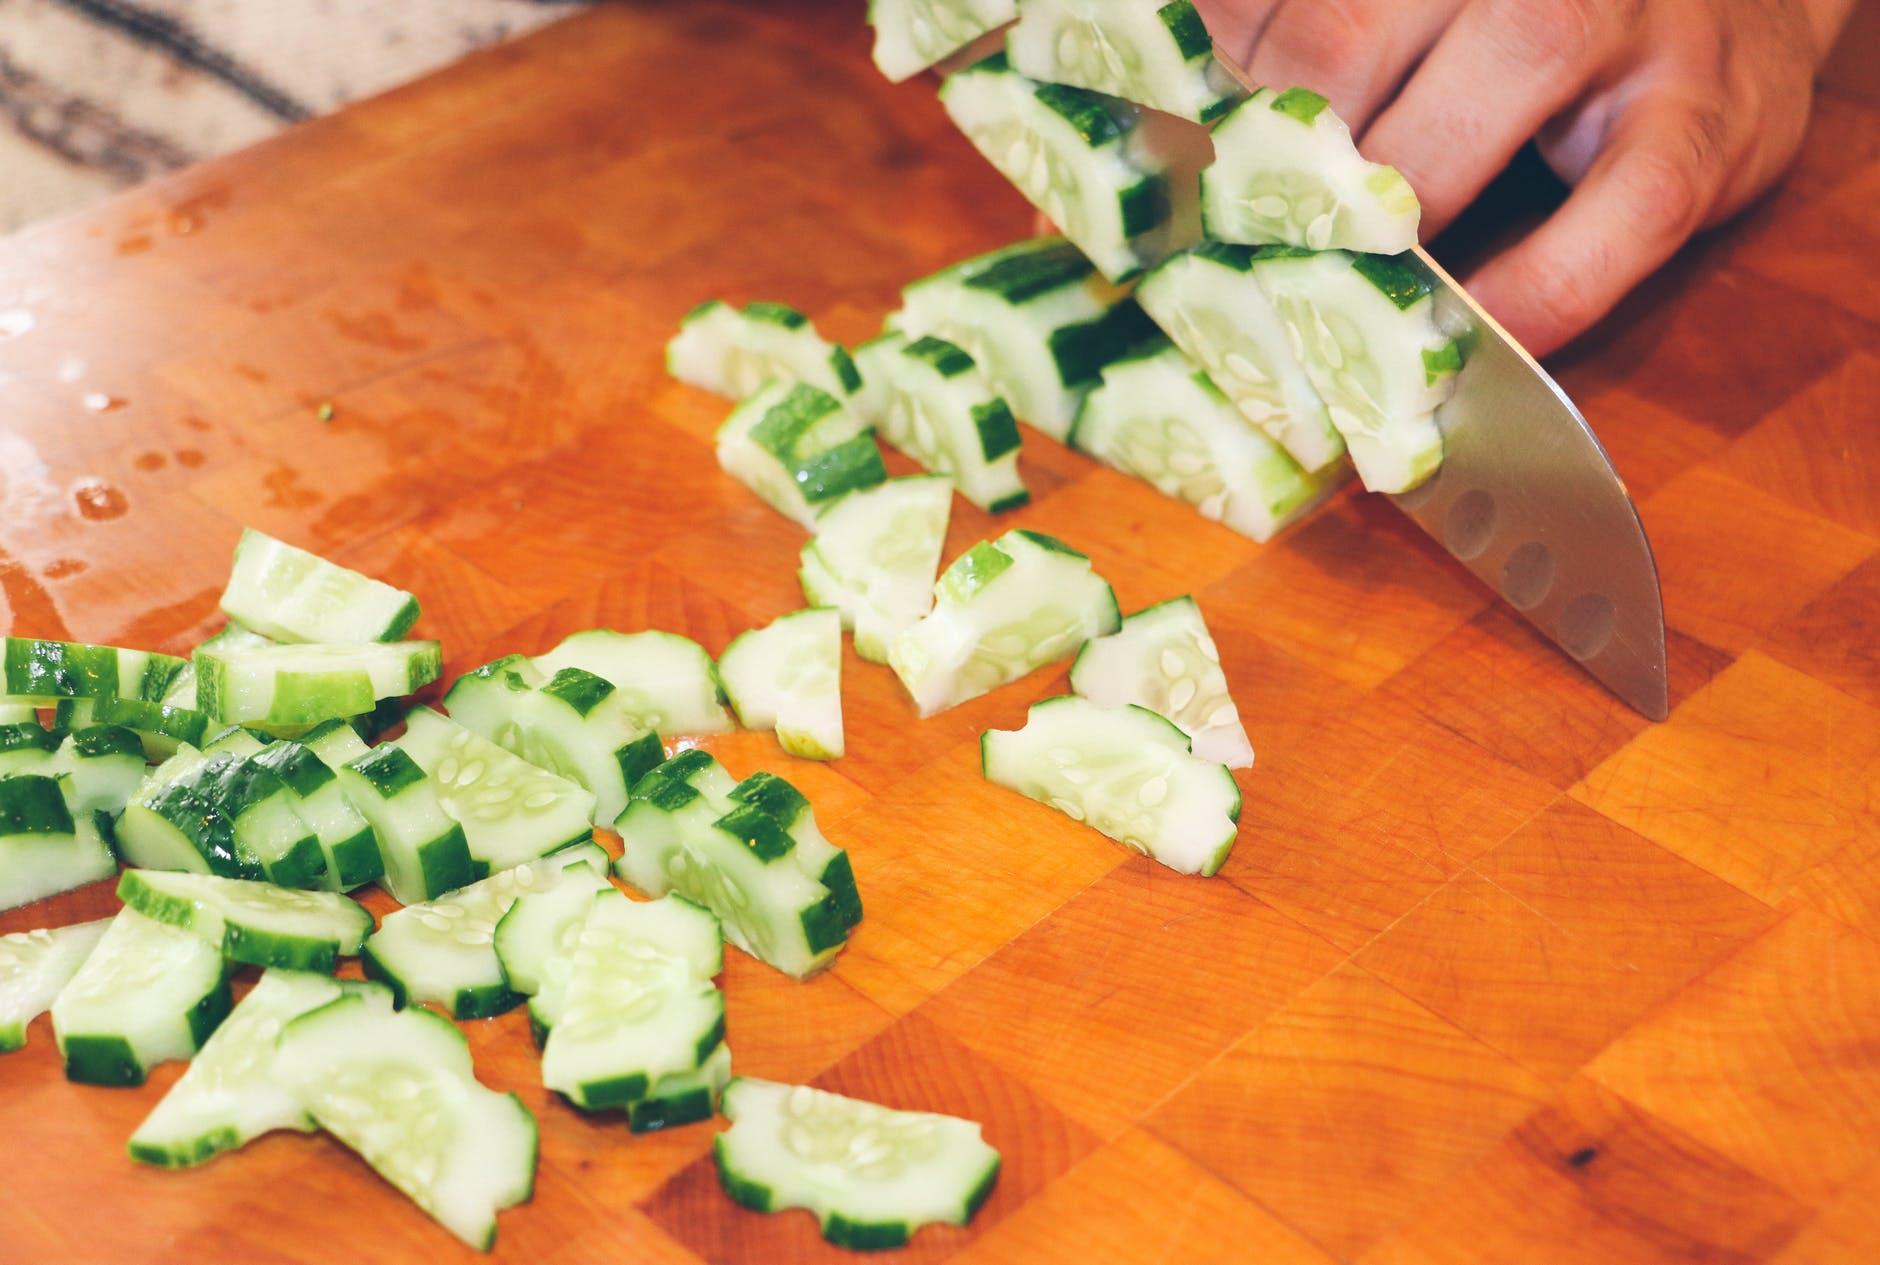 person slicing cucumber vegetable